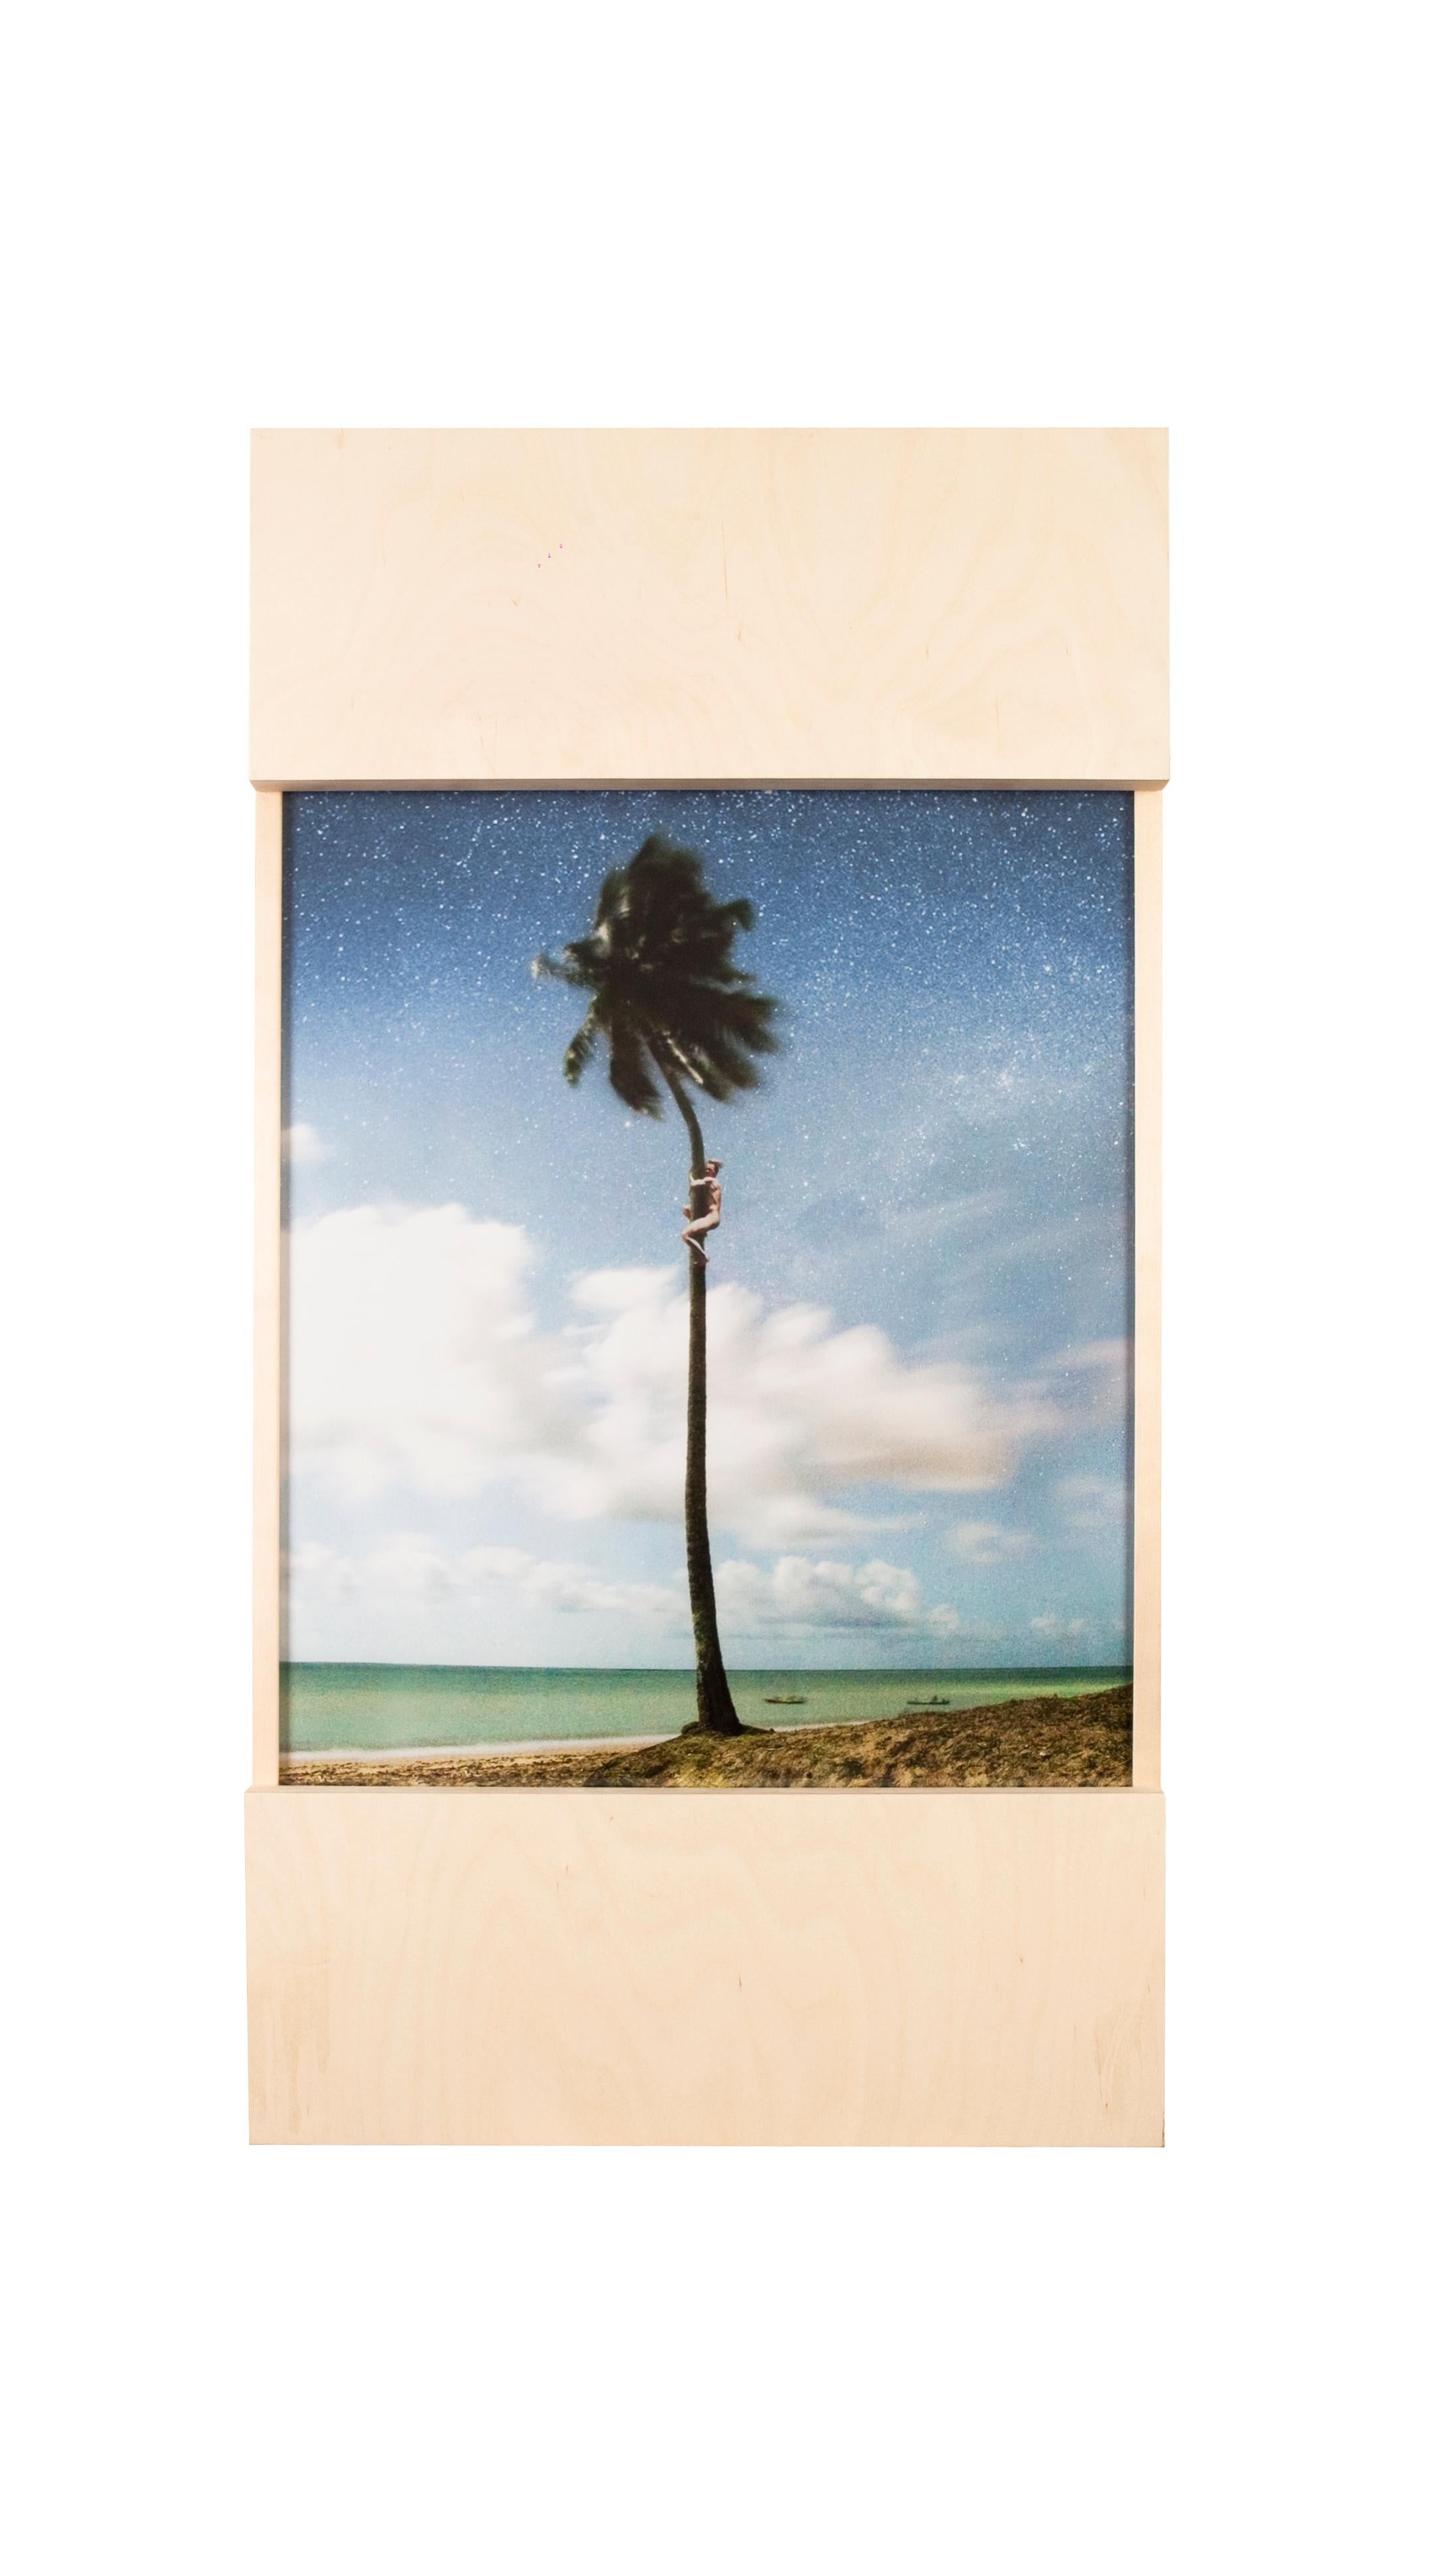 'Temporary Monument #1: Coqueiro' - landscape, palm tree, human figure - Photograph by Fyodor Pavlov-Andreevich